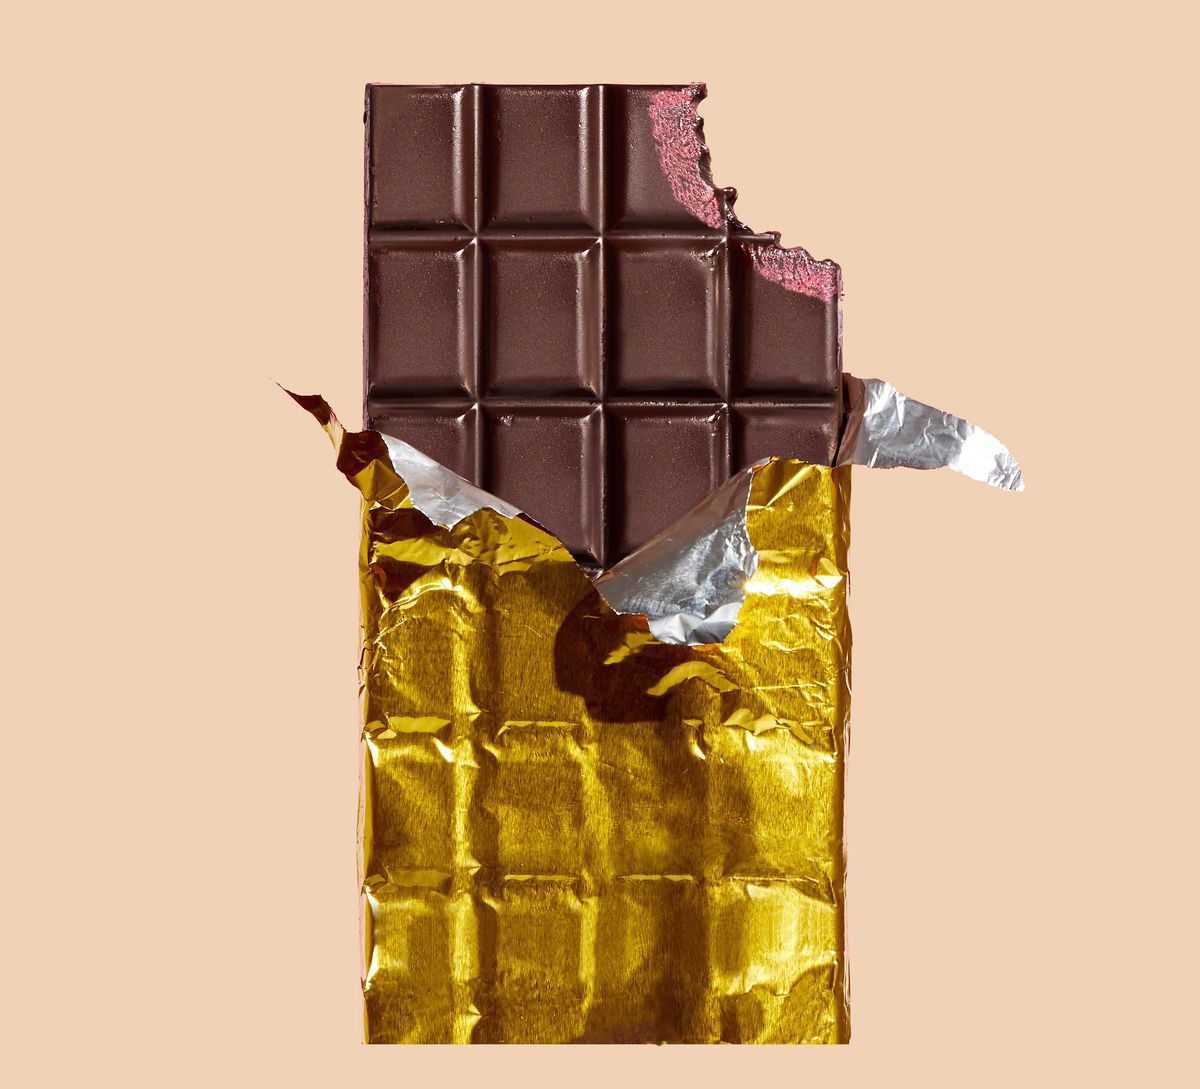 foods that boost sex drive, partially eaten chocolate bar with lipstick on it